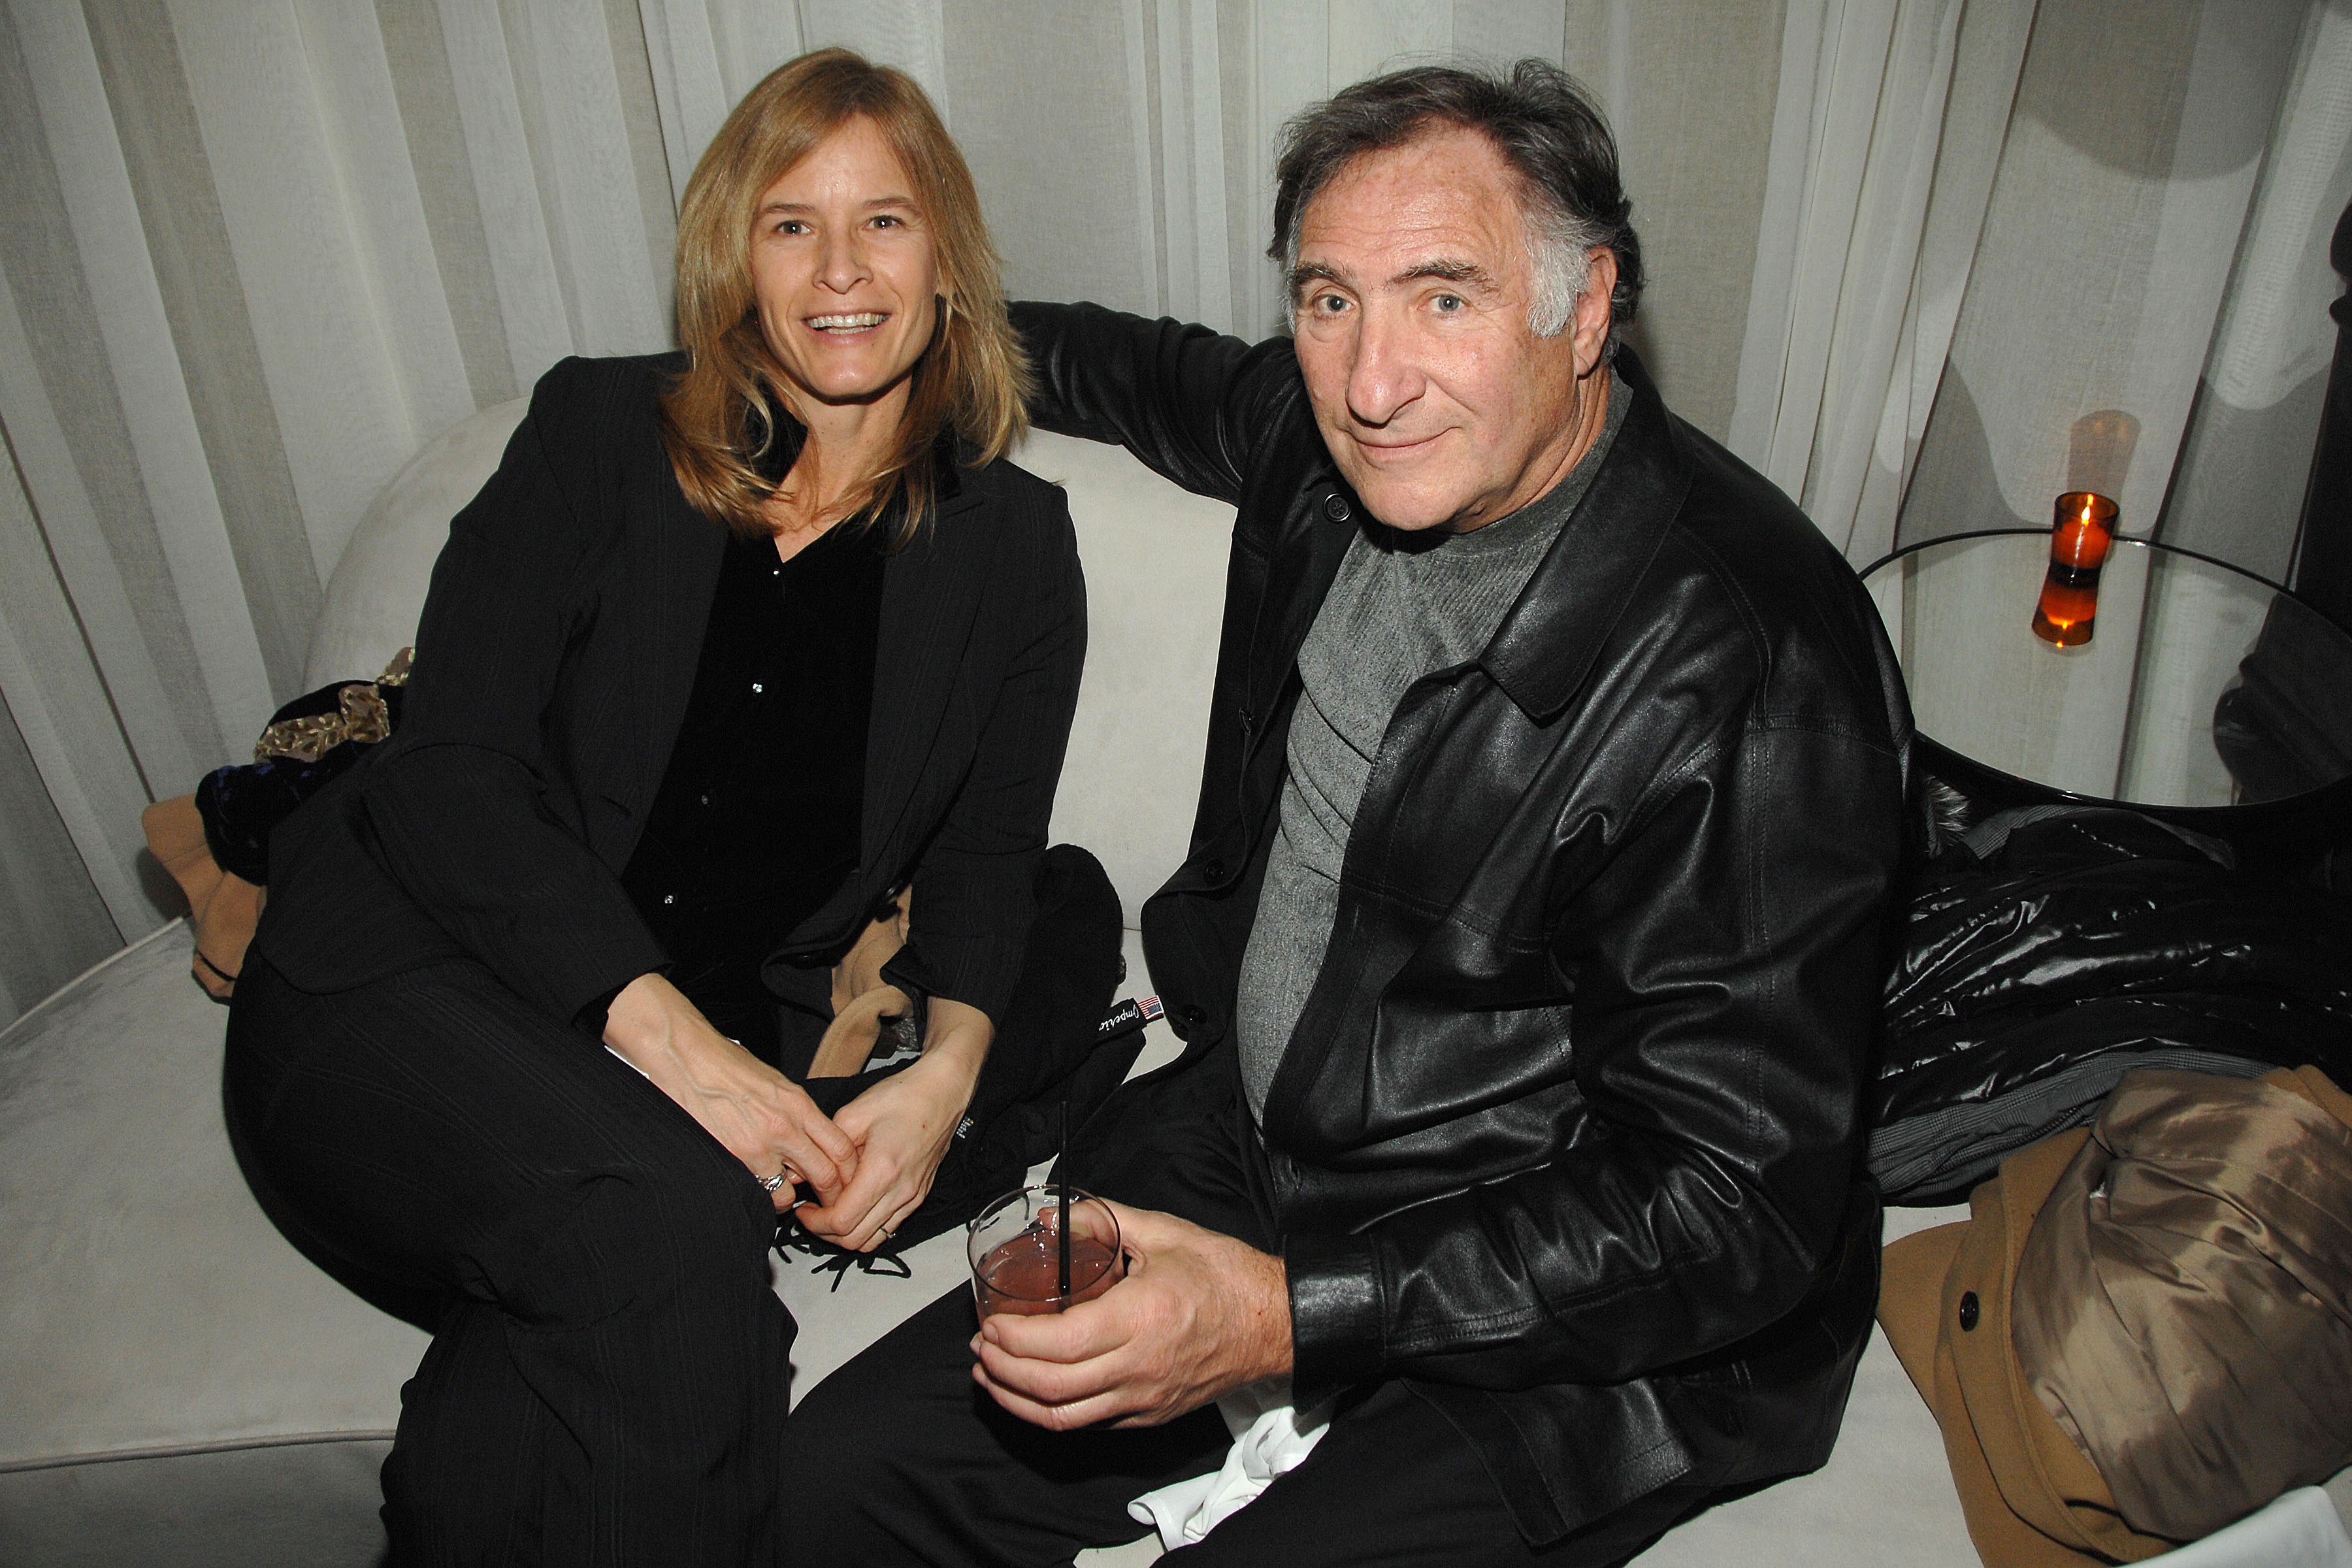 Kathryn Danielle and Judd Hirsch at The Cinema Society and DKNY "Cassandra's Dream" after-party in 2007 | Source: Getty Images